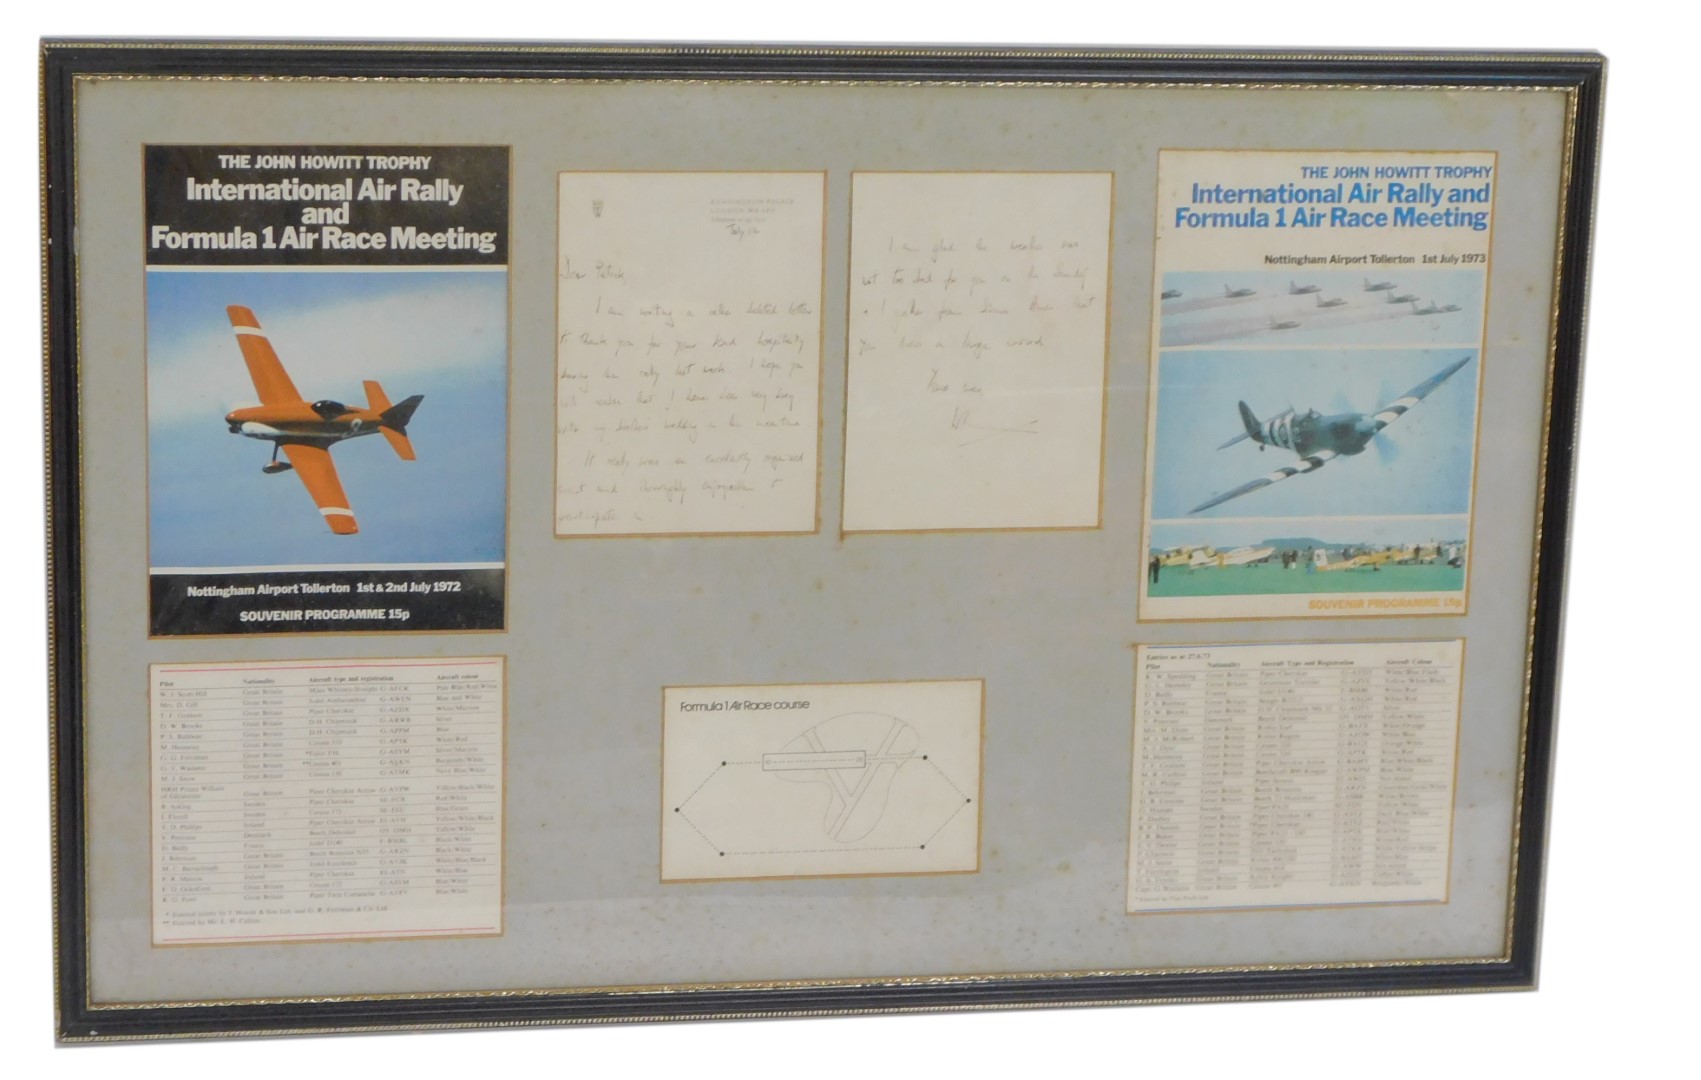 A framed aviation poster, relating to the John Howard Trophy International Air Rally and Formula 1 A